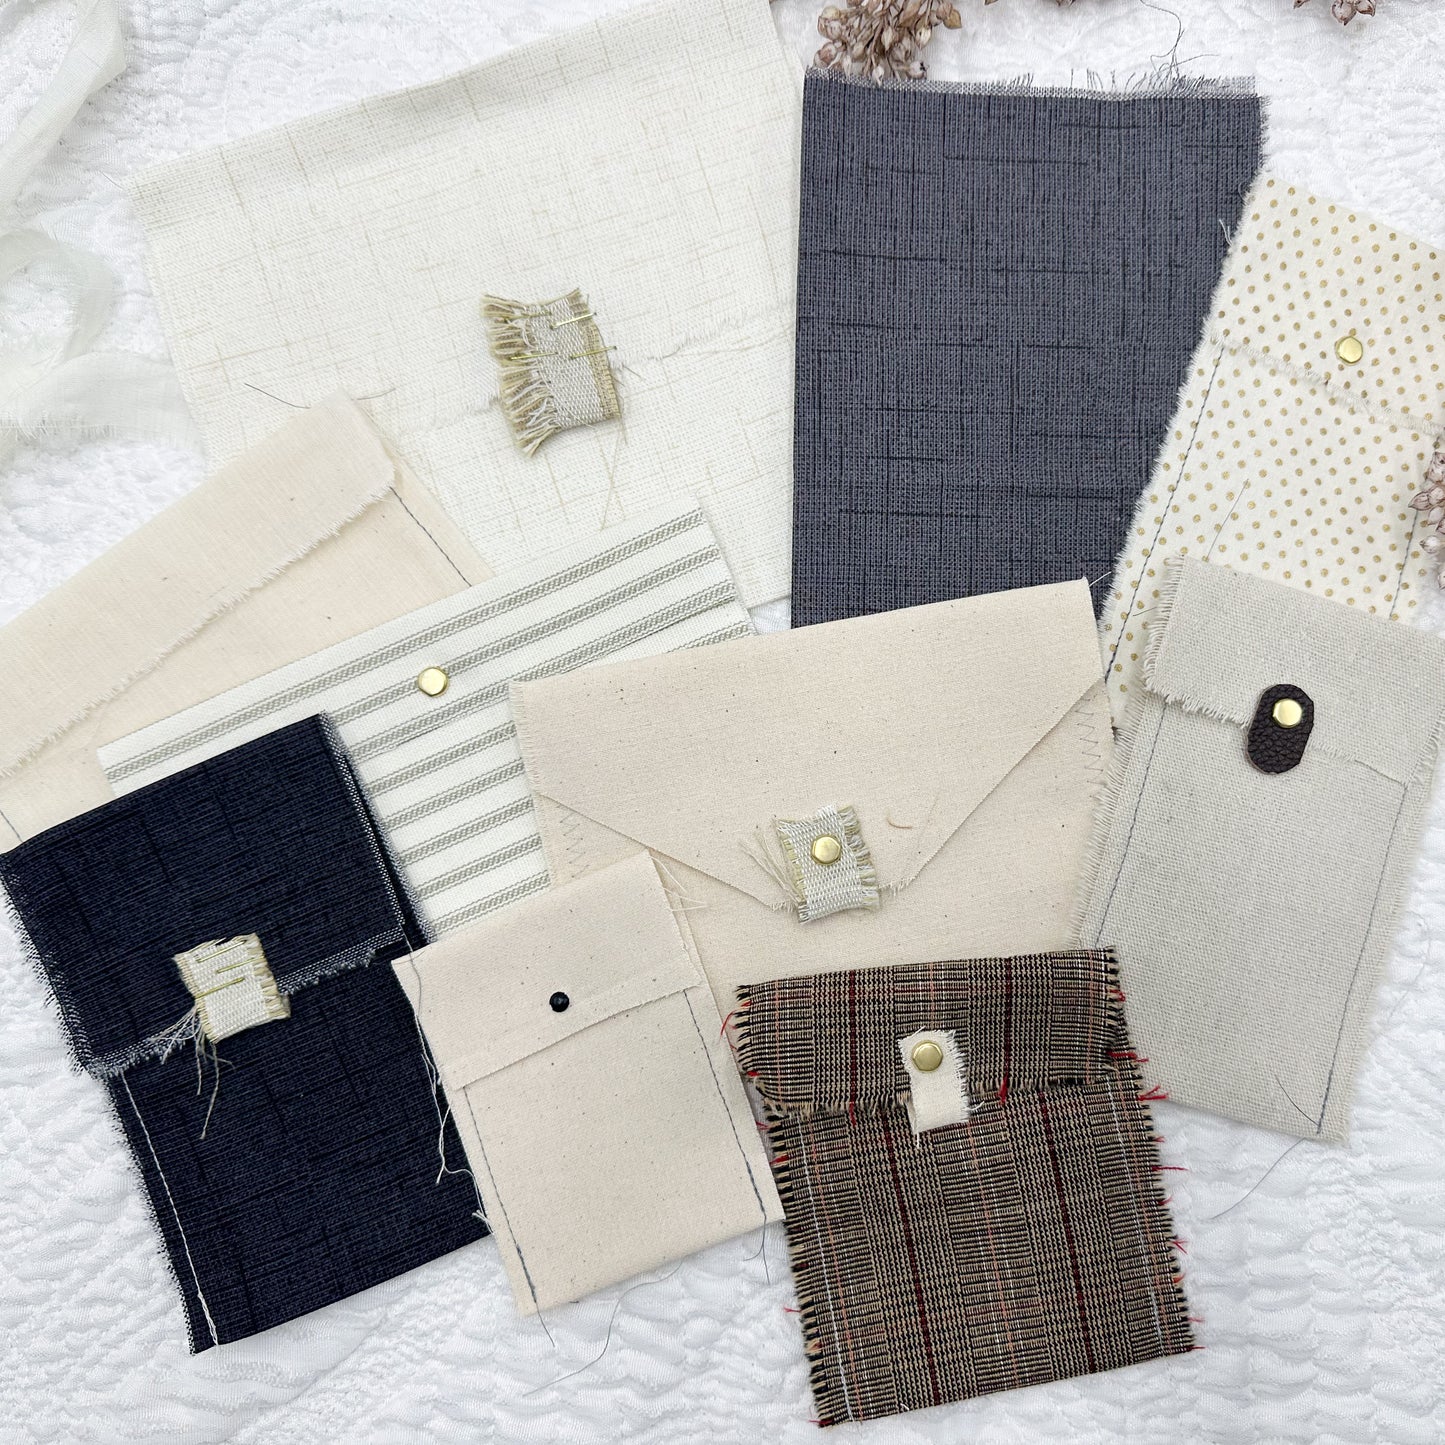 Rough Sewn Fabric Pockets and Signature Pages in Neutral Colors